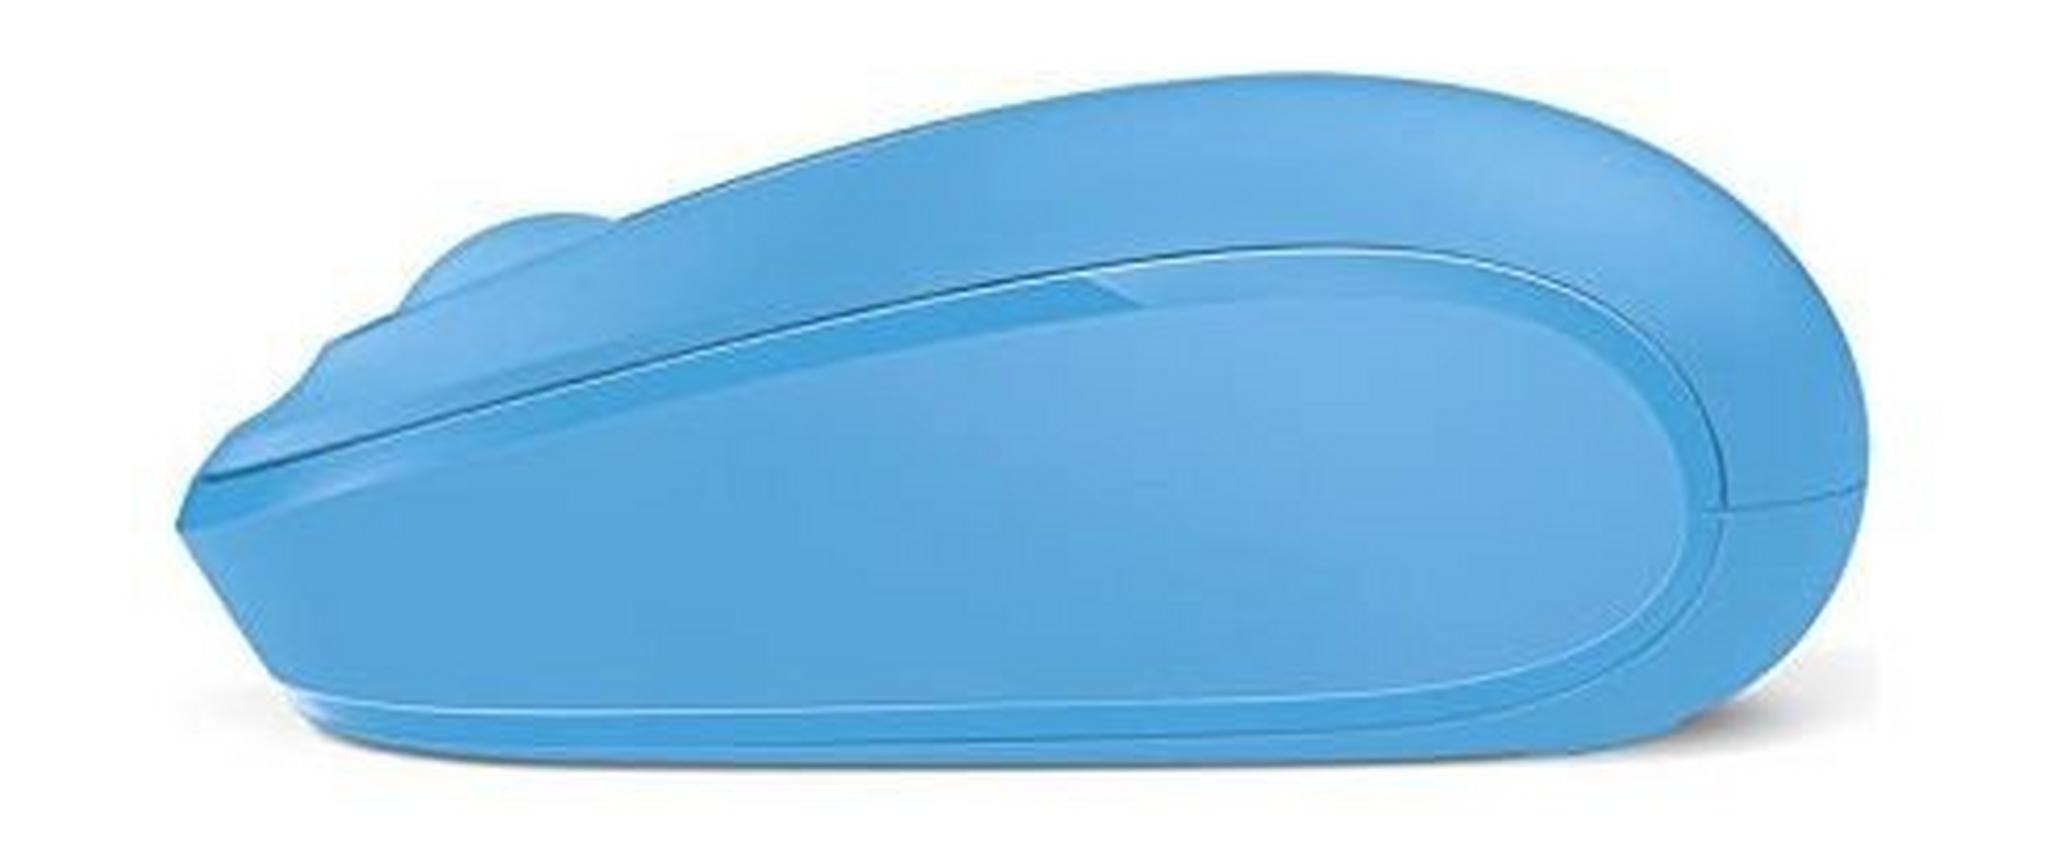 Microsoft 1850 Wireless Mobile Mouse - Blue